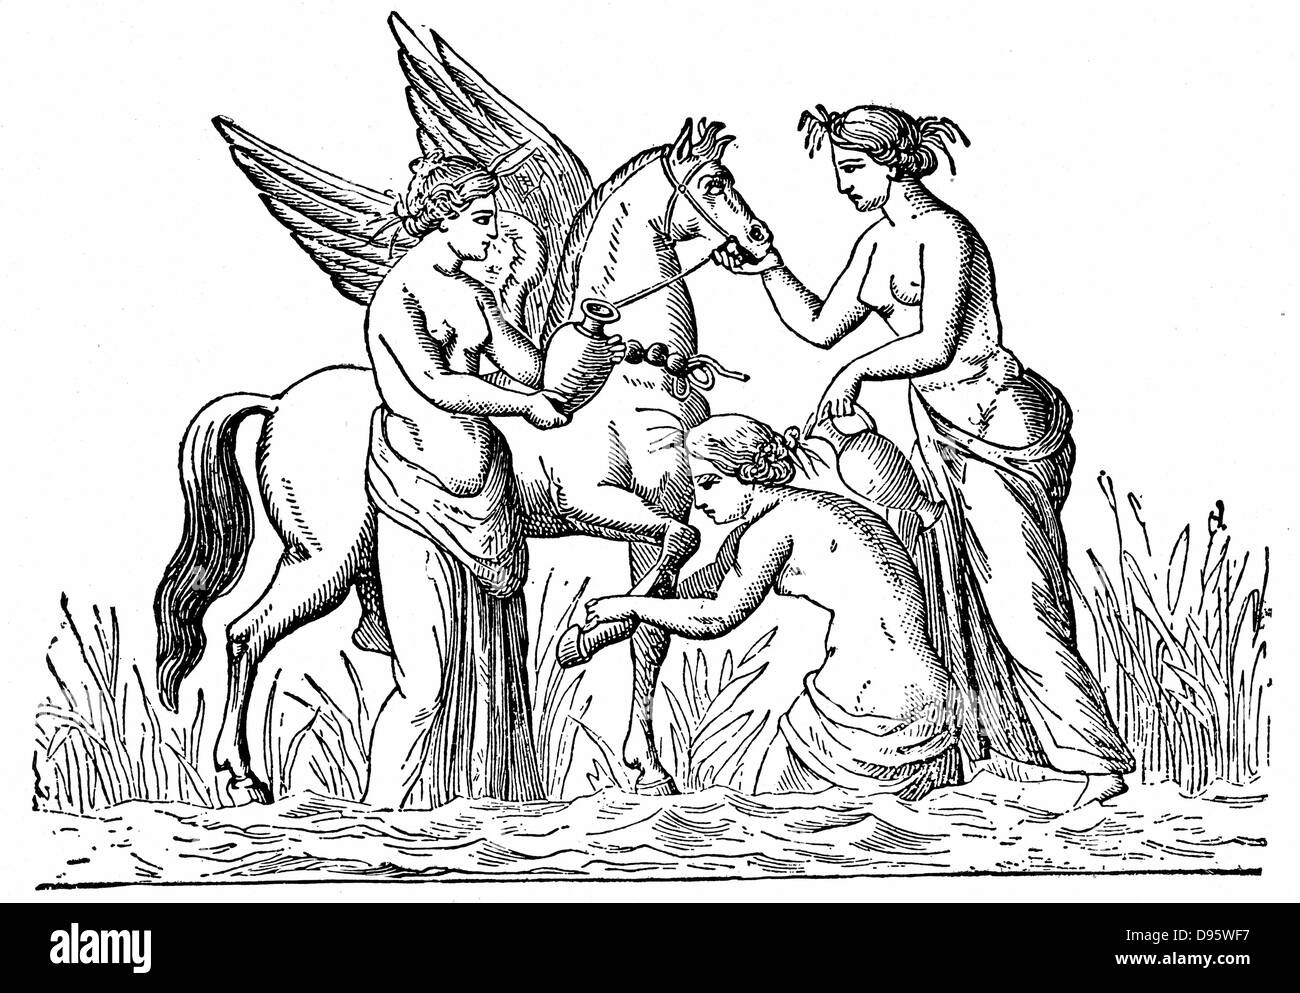 Nymphs attending the winged horse, Pegasus which Bellerophon in his fight against the Chimera. Wood engraving Stock Photo